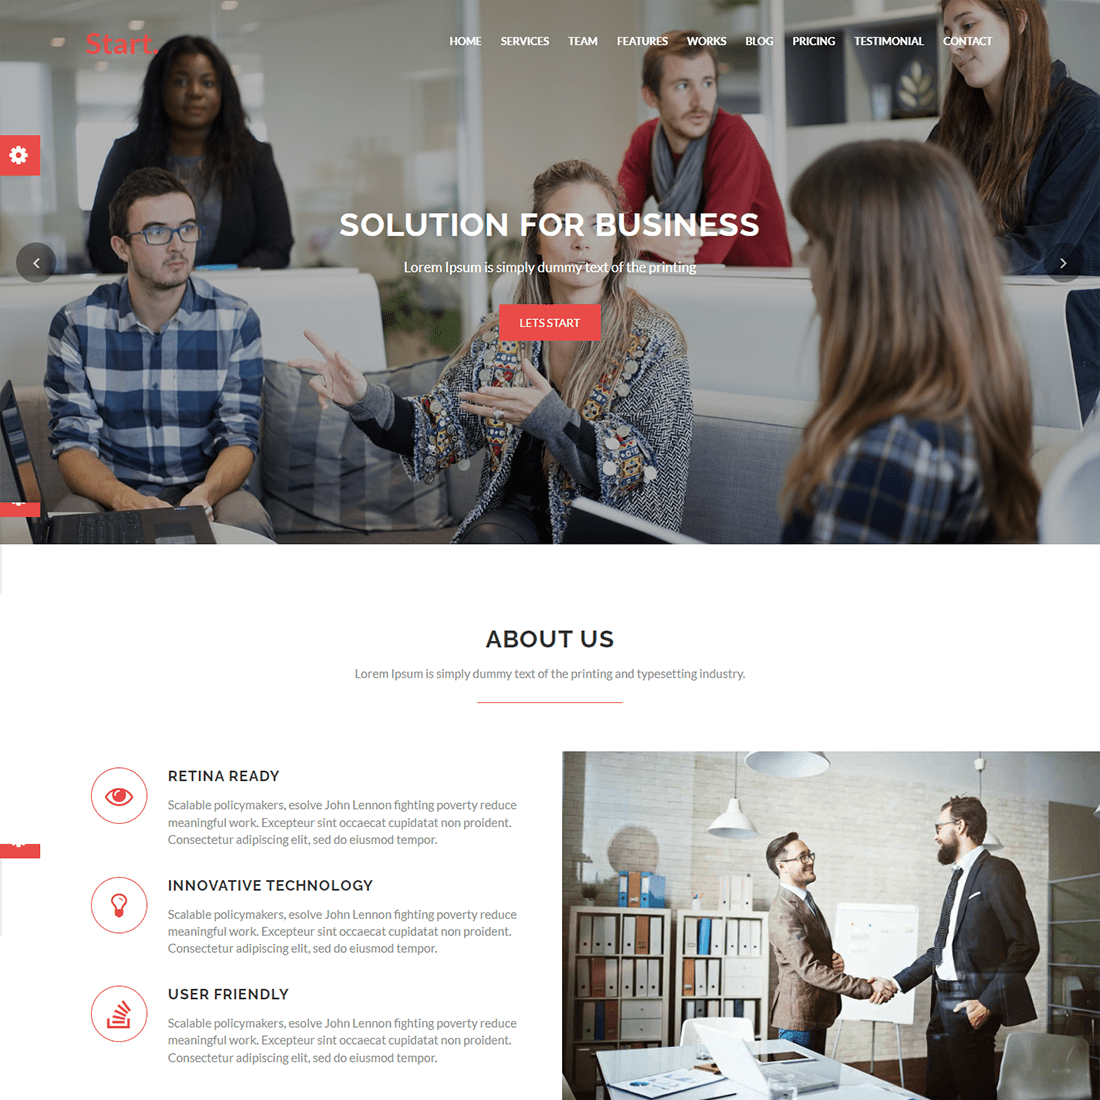 Corporate Business Agency Website Theme cover image.